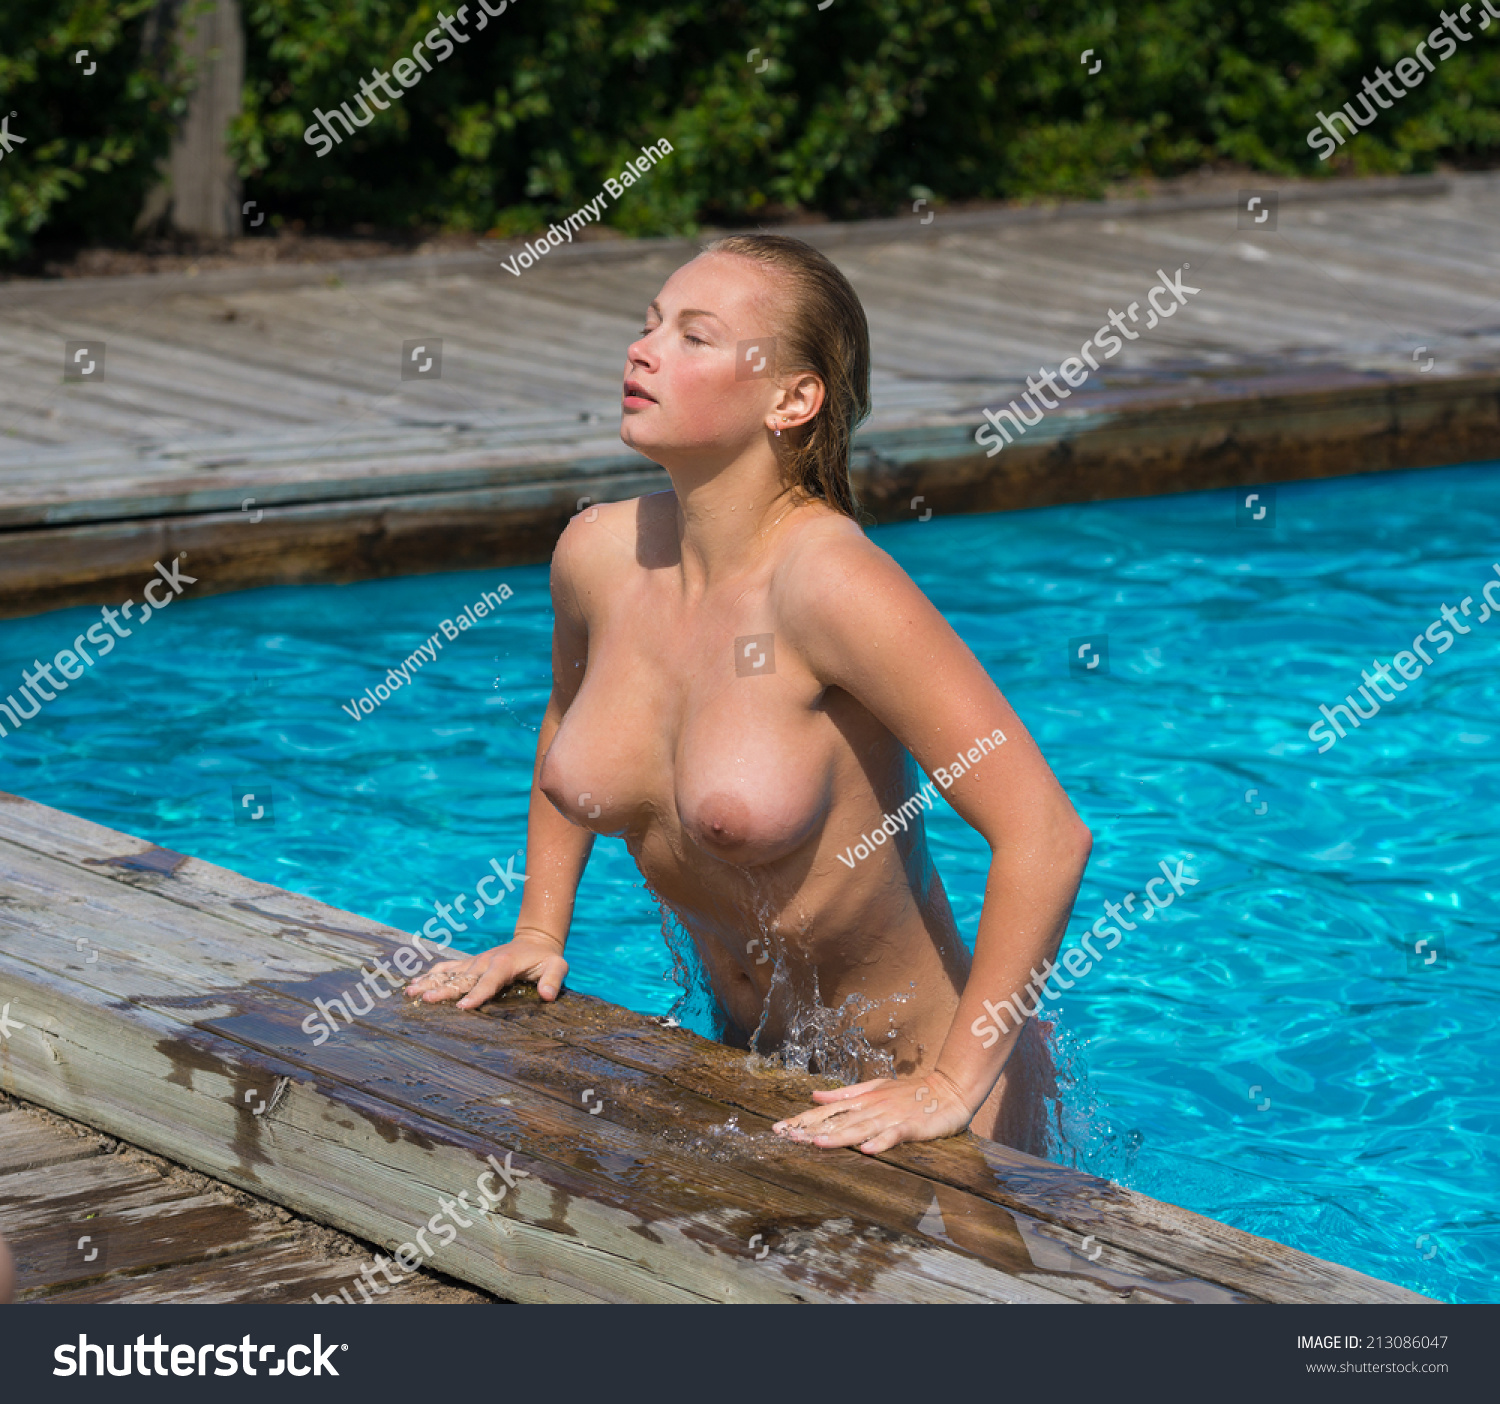 Movies Of Women Swimming Naked 15